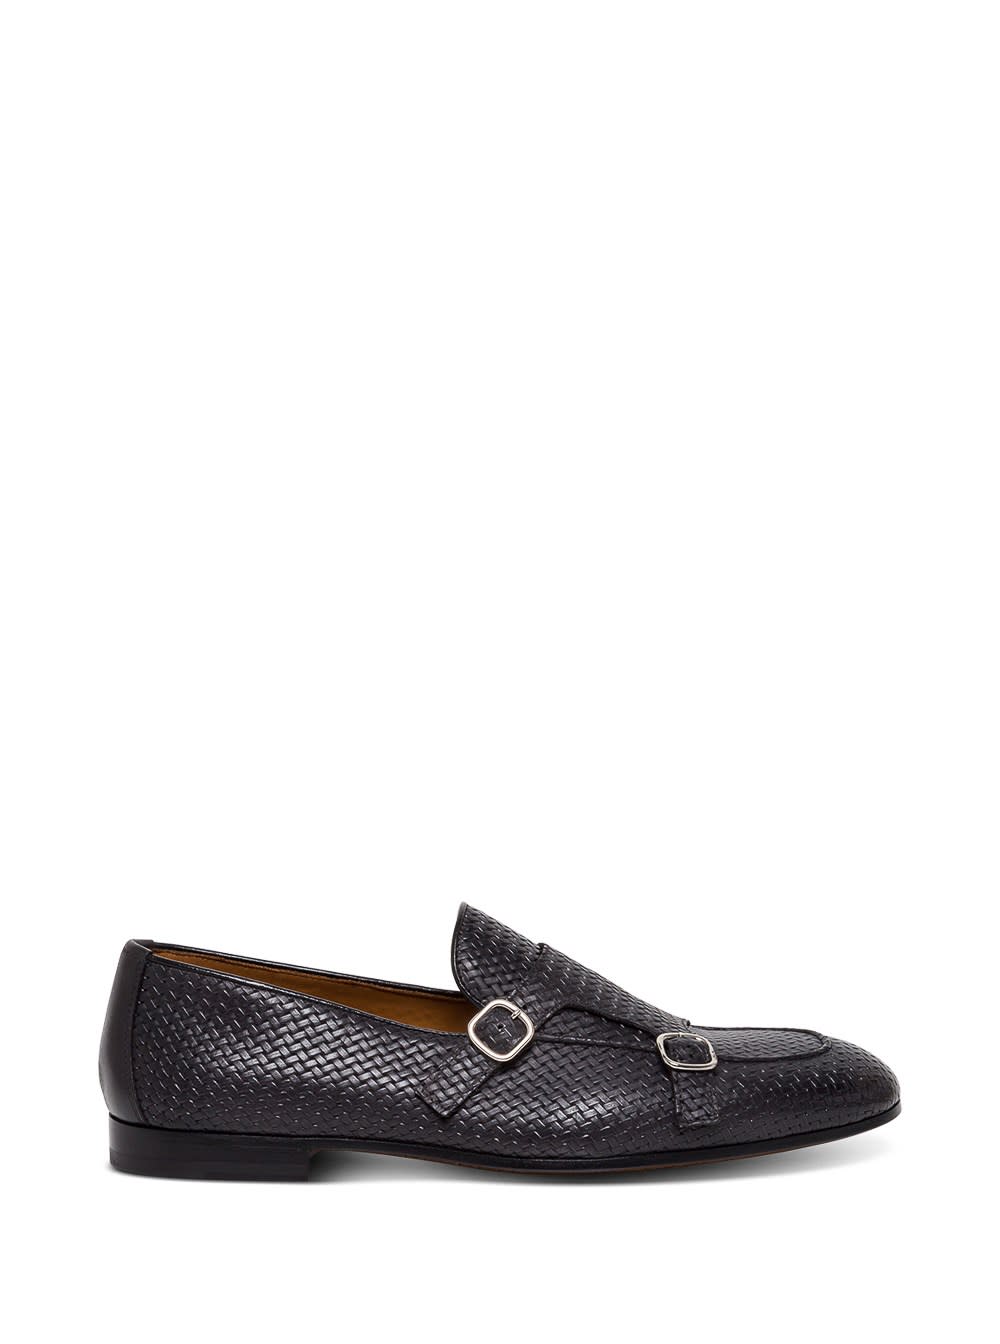 Doucals Braided Leather Loafers With Buckles